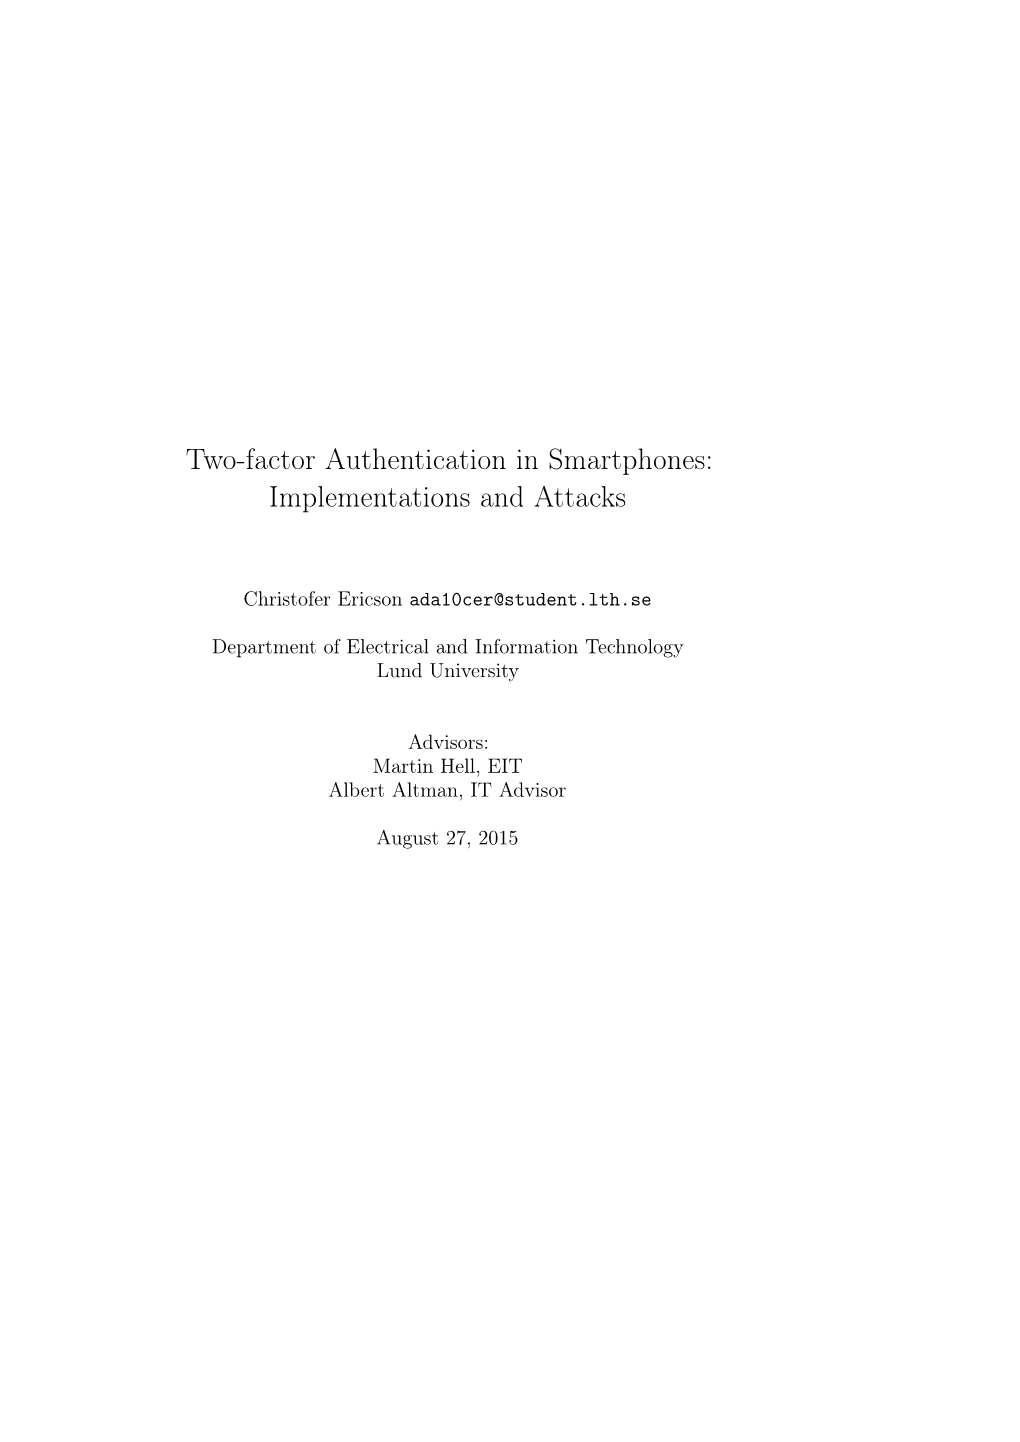 Two-Factor Authentication in Smartphones: Implementations and Attacks